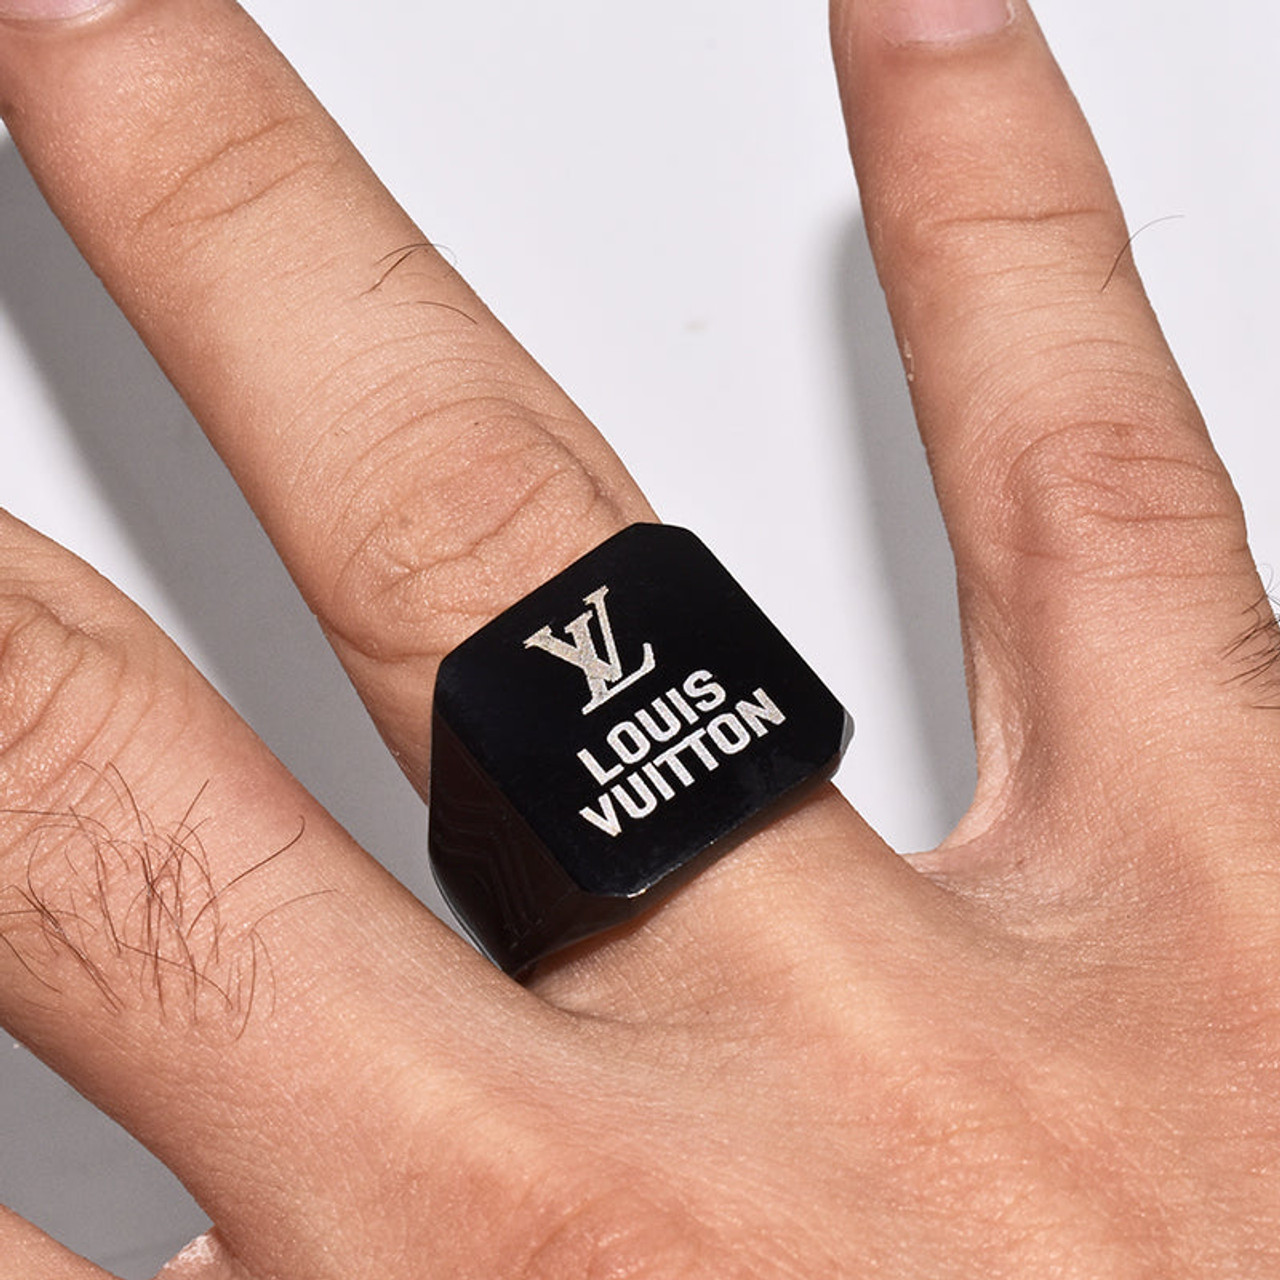 Buy Online Attractive Louis Vuitton Titanium Stainless Steel Black Ring at